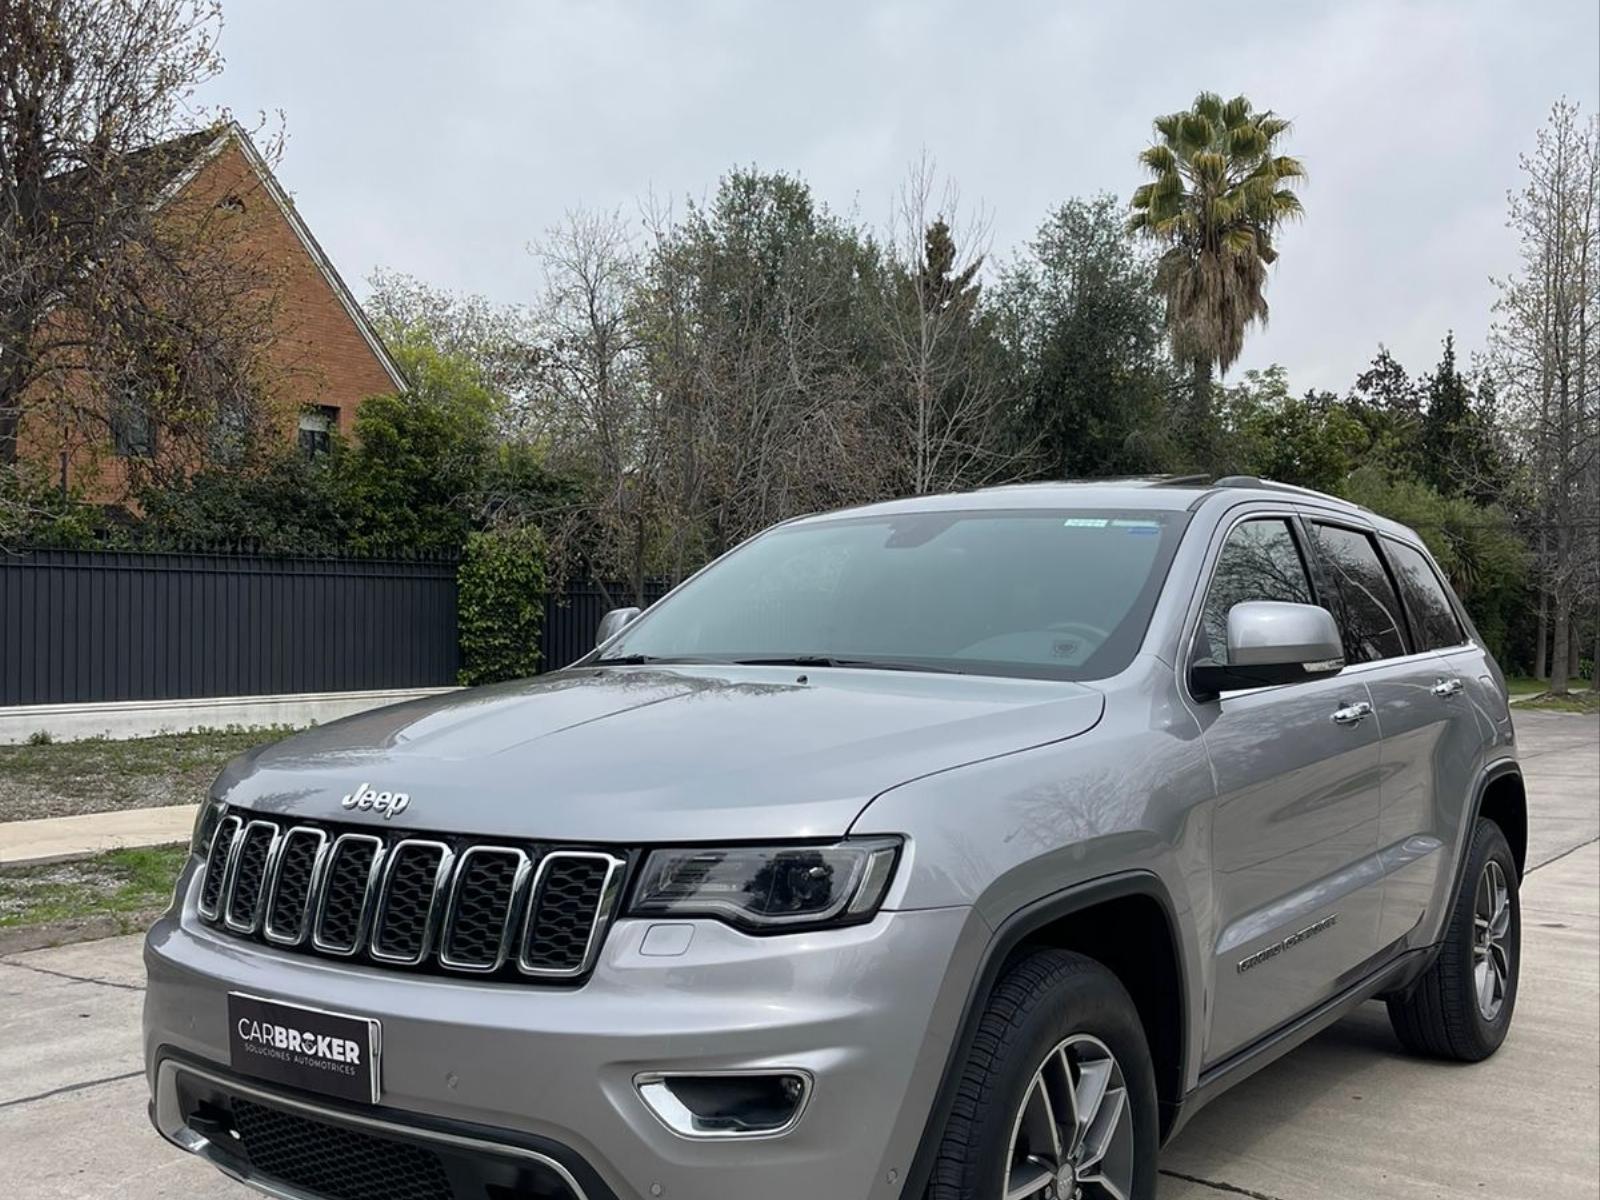 JEEP GRAND CHEROKEE Limited 2018 42.000 kms. - 